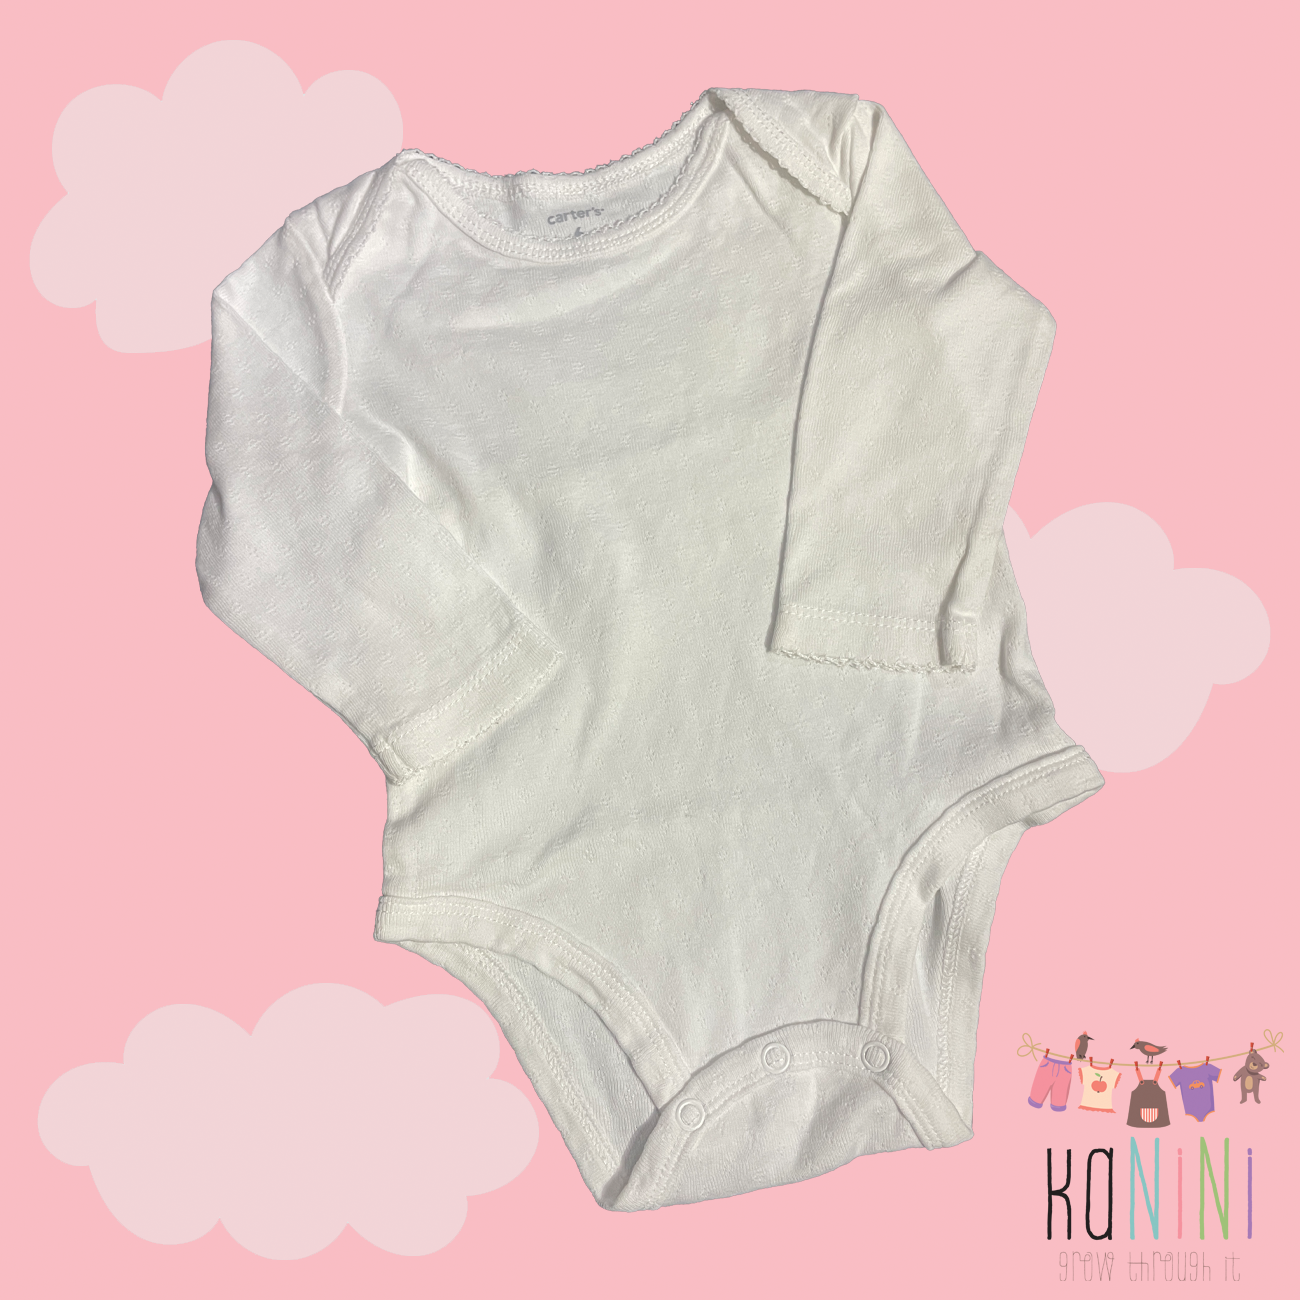 Featured image for “Carter's 6 Months Girls Long Sleeve Romper”